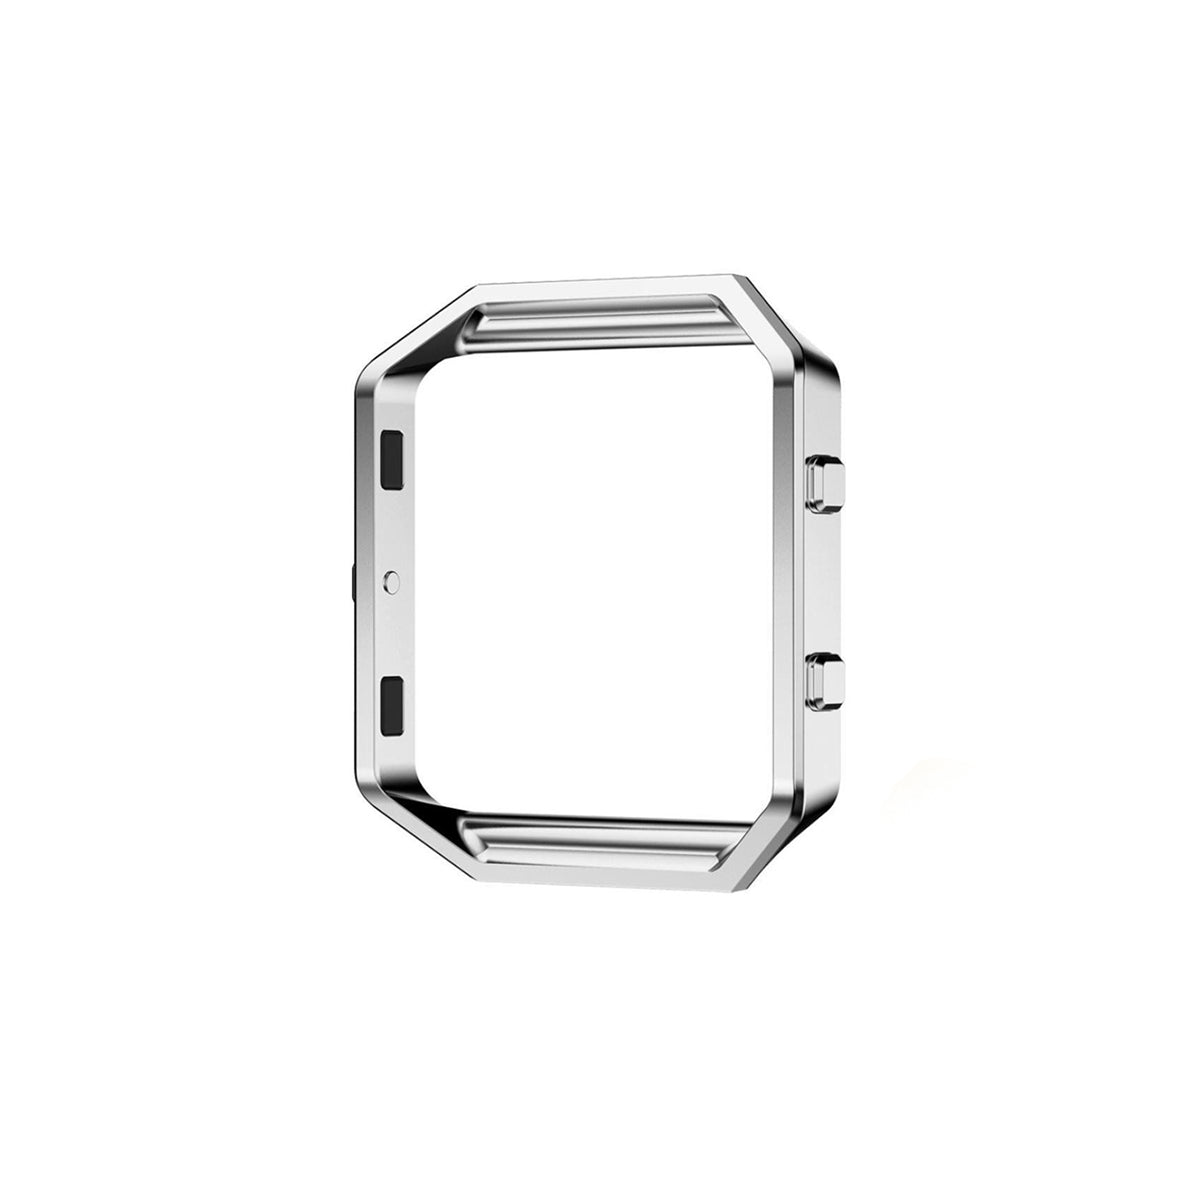 Metal Alloy Fitbit Blaze Frame Replacement Cradle Silver Steel  